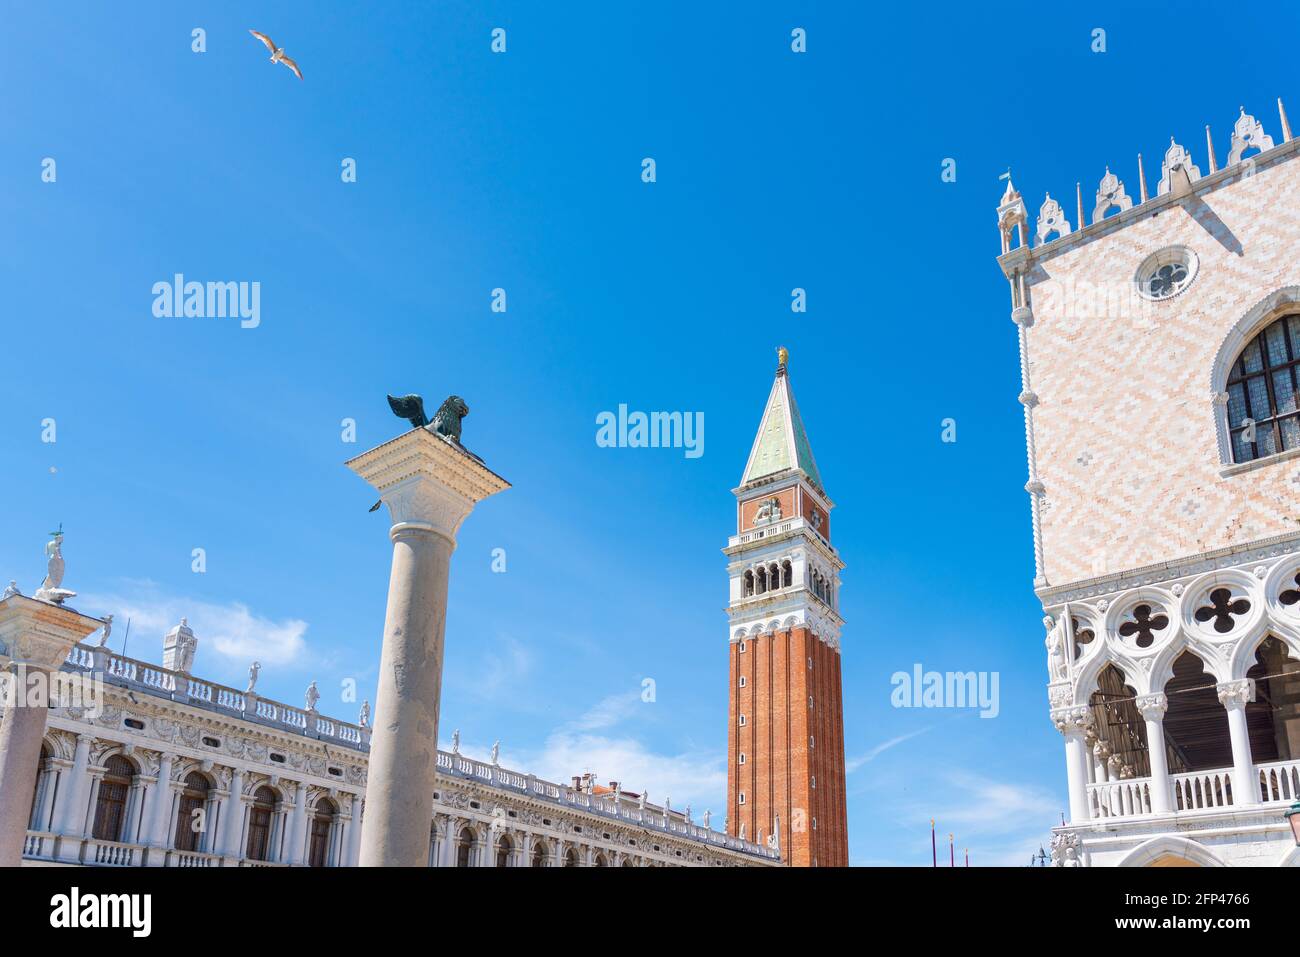 St Mark Square, campanile and buildings, blue sky. Venice, Italy Stock Photo